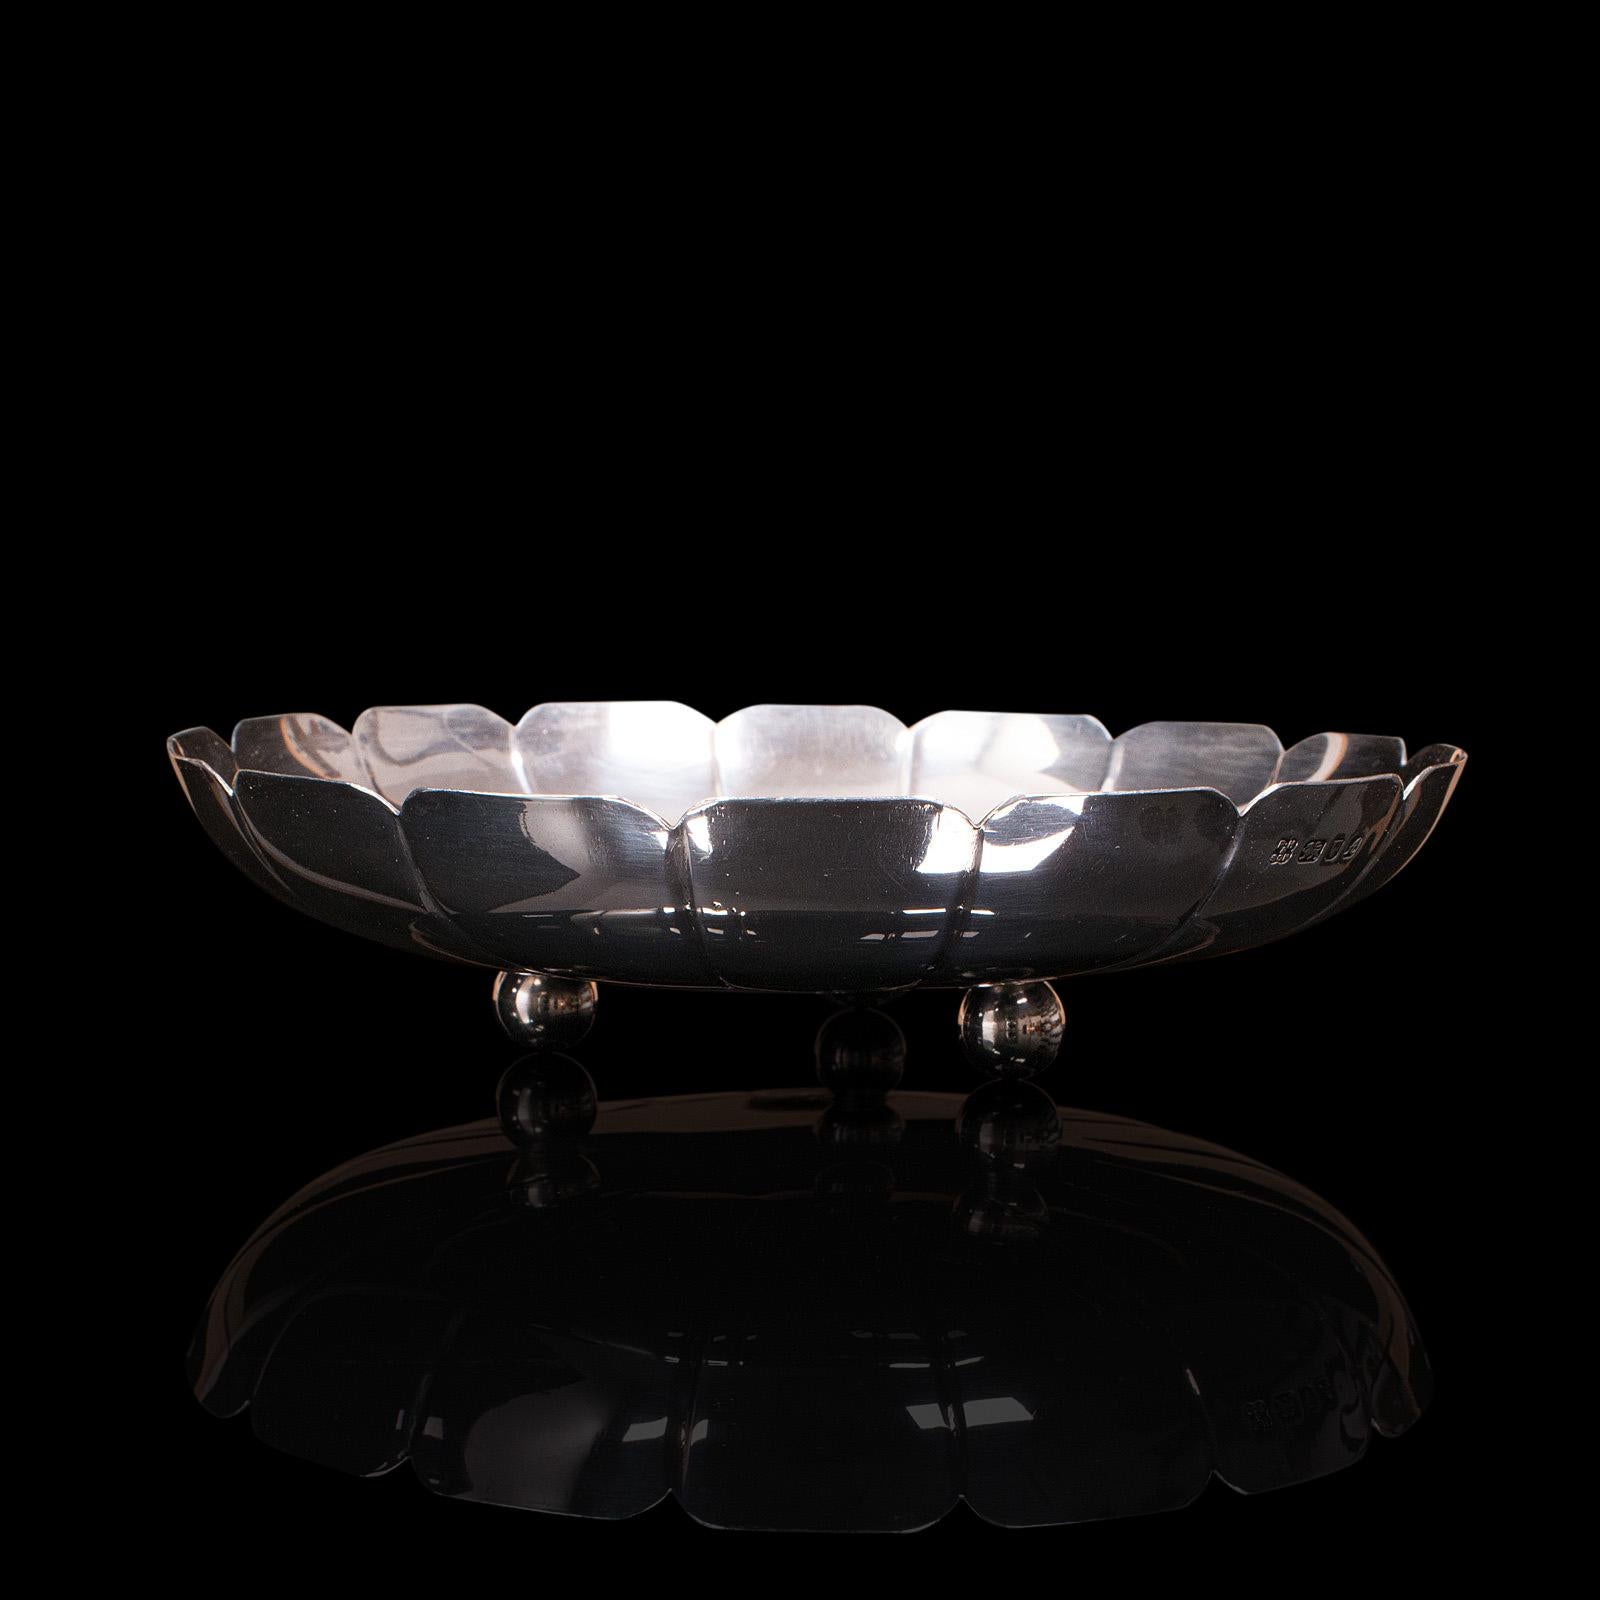 This is a vintage decorative bon bon dish. An English, sterling silver serving tray or bowl, dated by hallmark to 1975.

Attractive serving dish ideal for an afternoon tea gathering
Displaying a desirable aged patina throughout
Distinctive petal